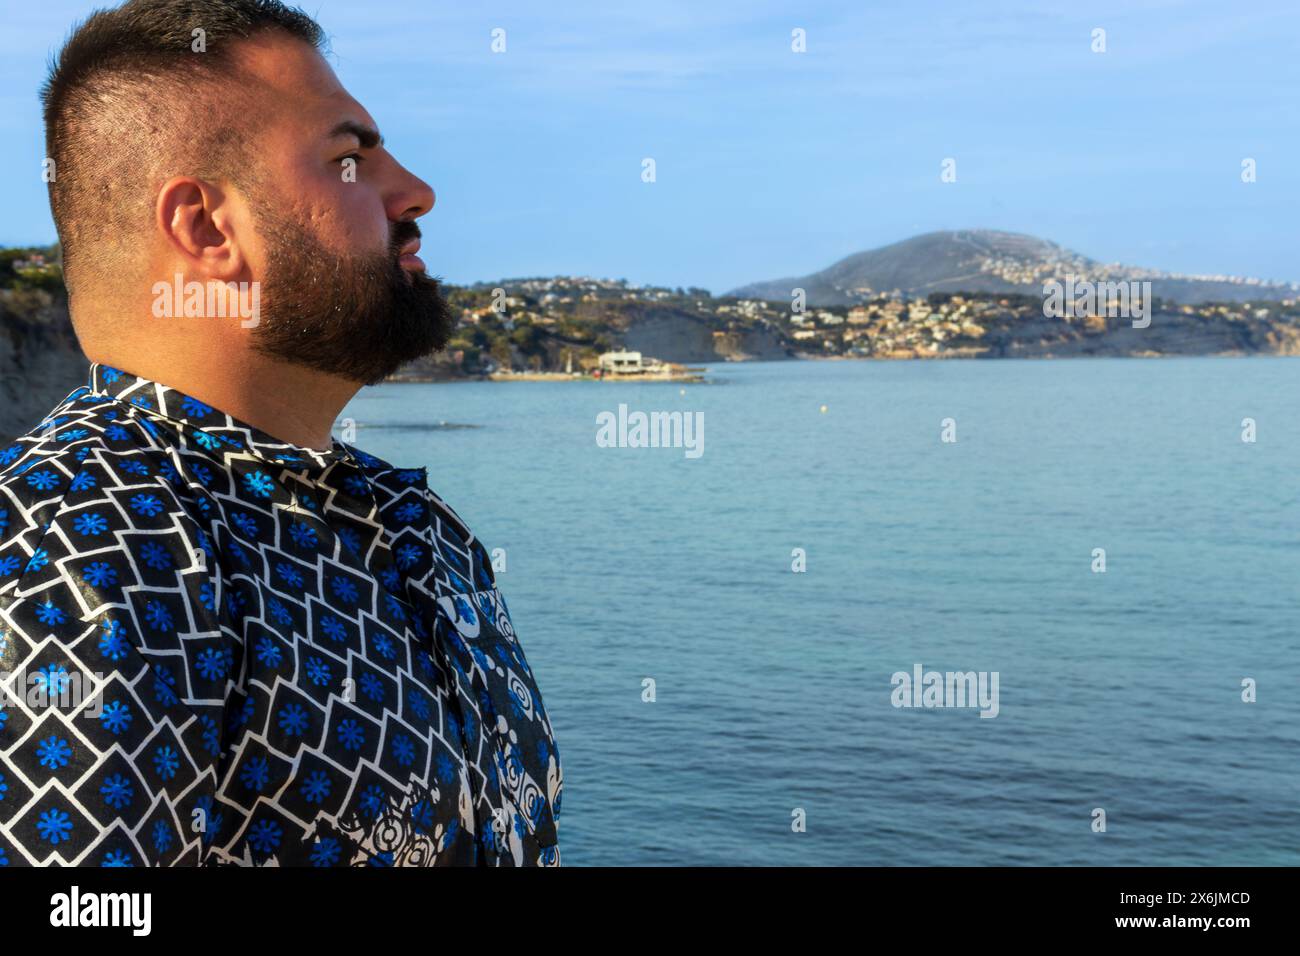 This portrait captures a 30-year-old man standing by the sea, his gaze reflecting a sense of calm and introspection. Stock Photo